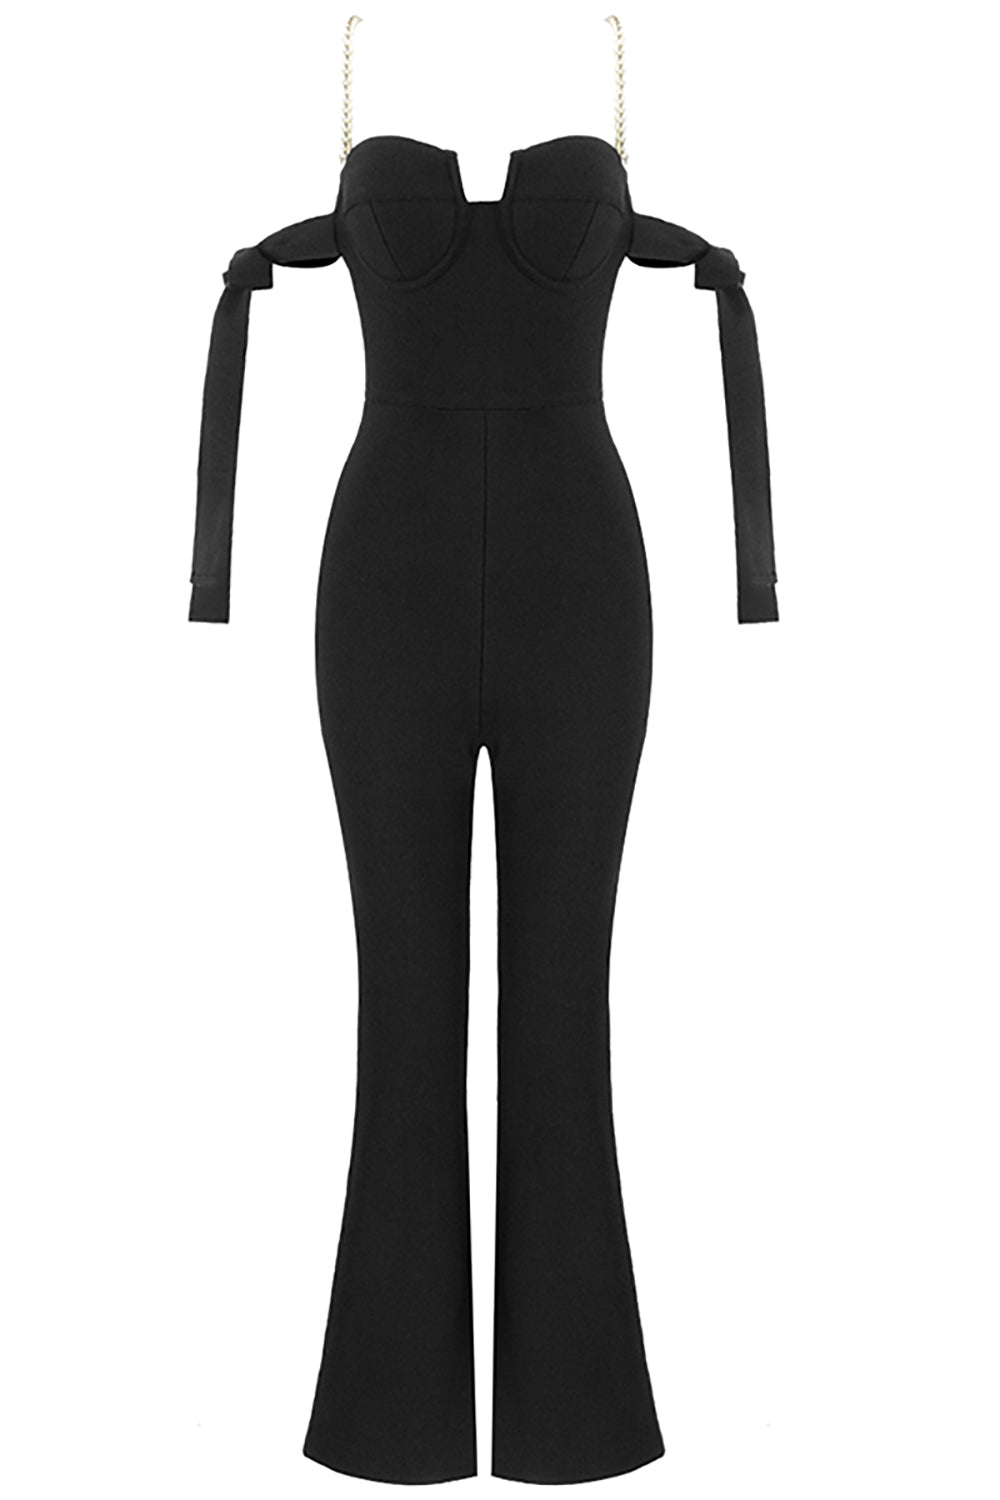 Off Shoulder Bow Woman Bodycon Bandage Jumpsuit - IULOVER